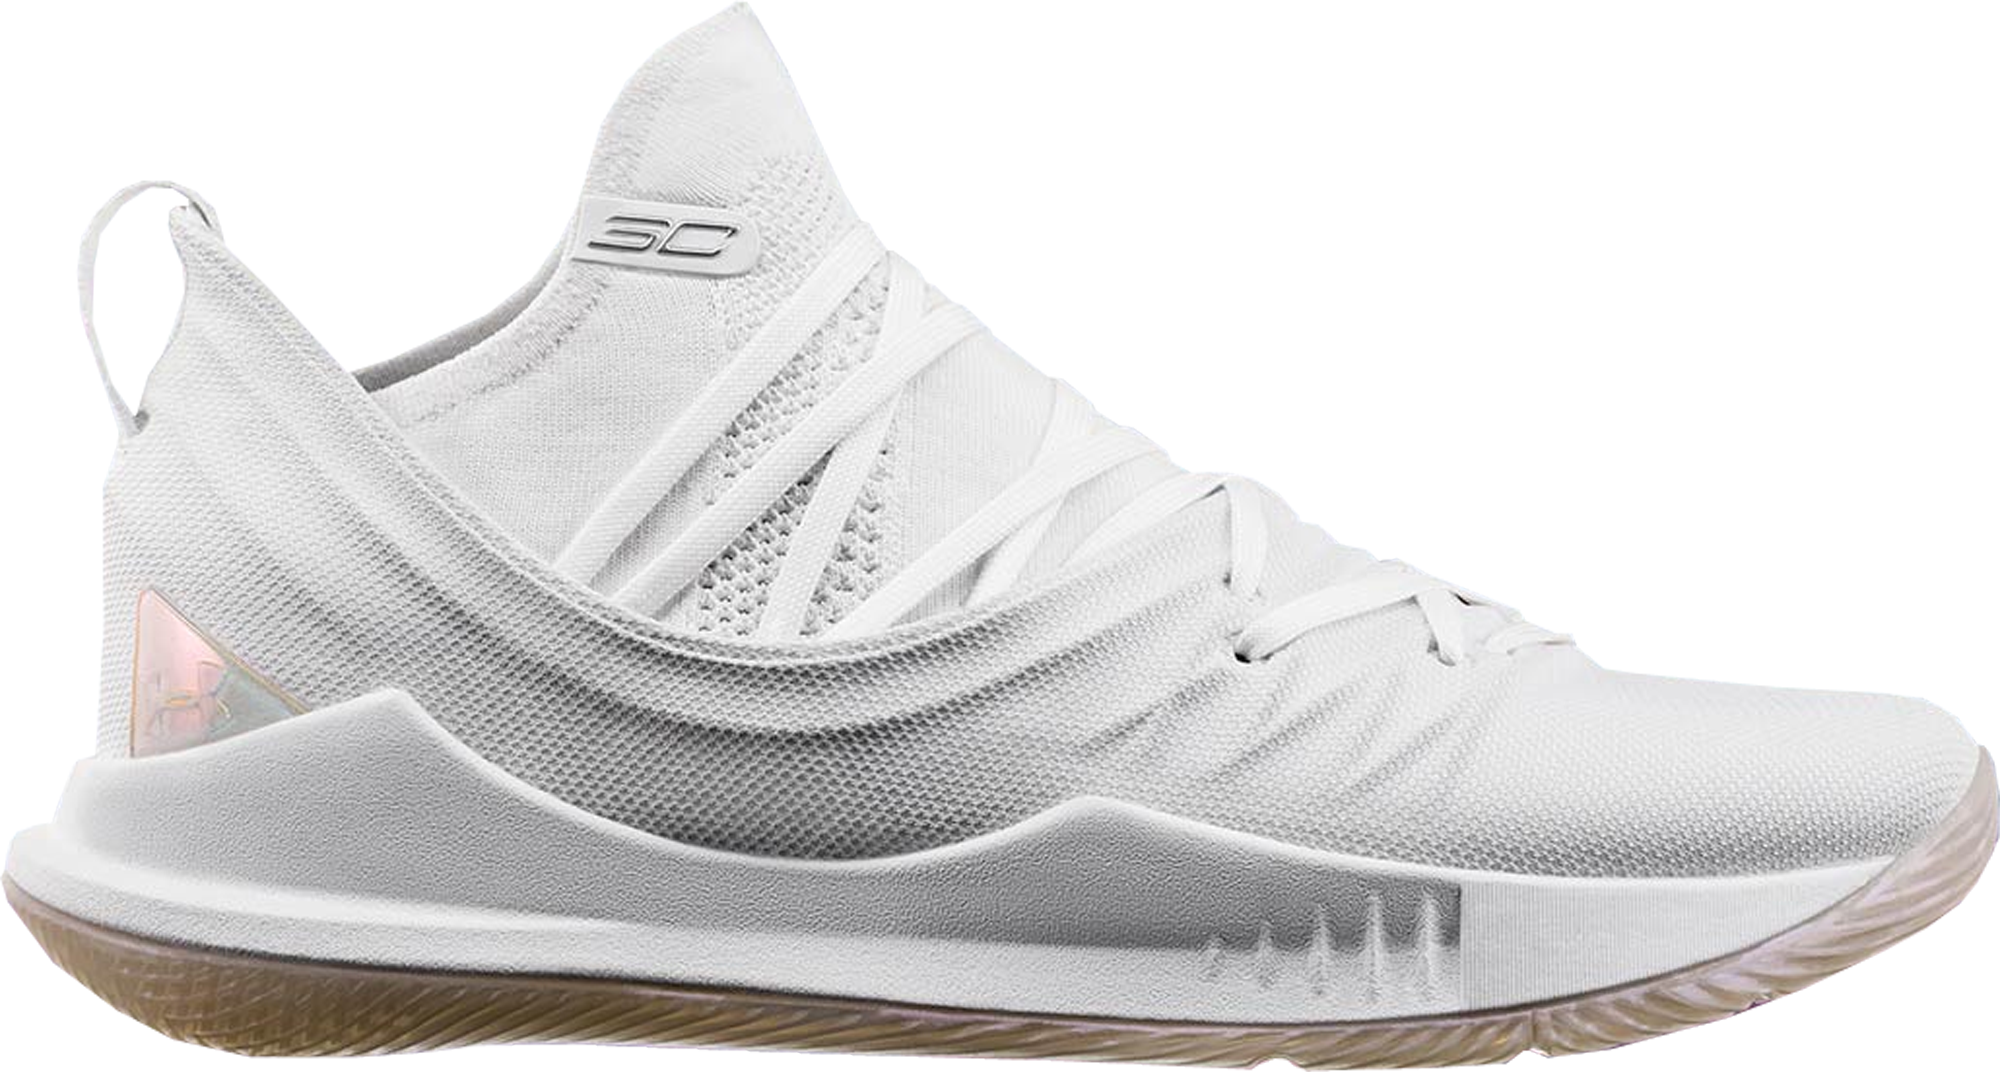 curry 5 all white